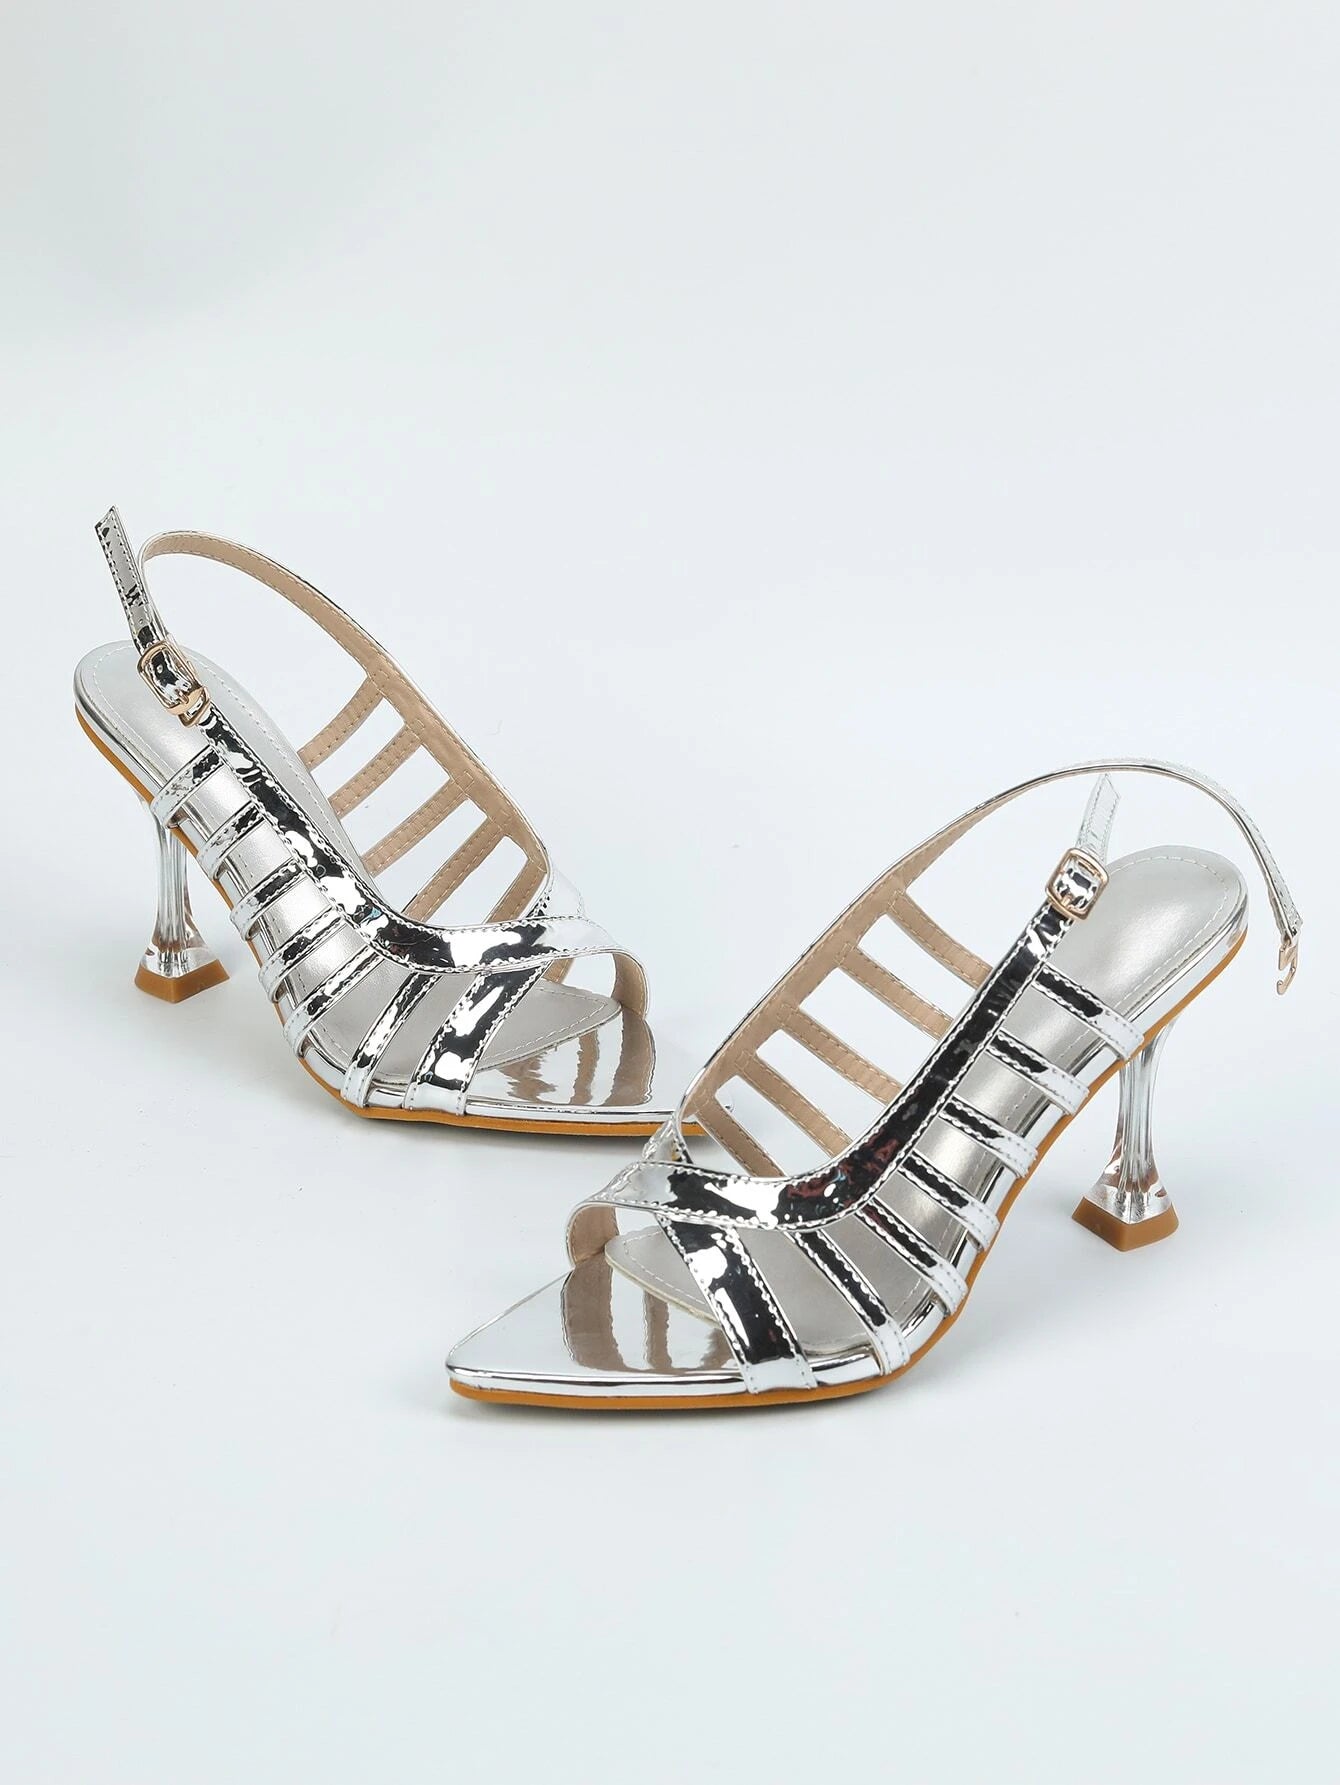 Women Metallic Cut Out Heeled Sandals, Glamorous Party Slingback Sandals